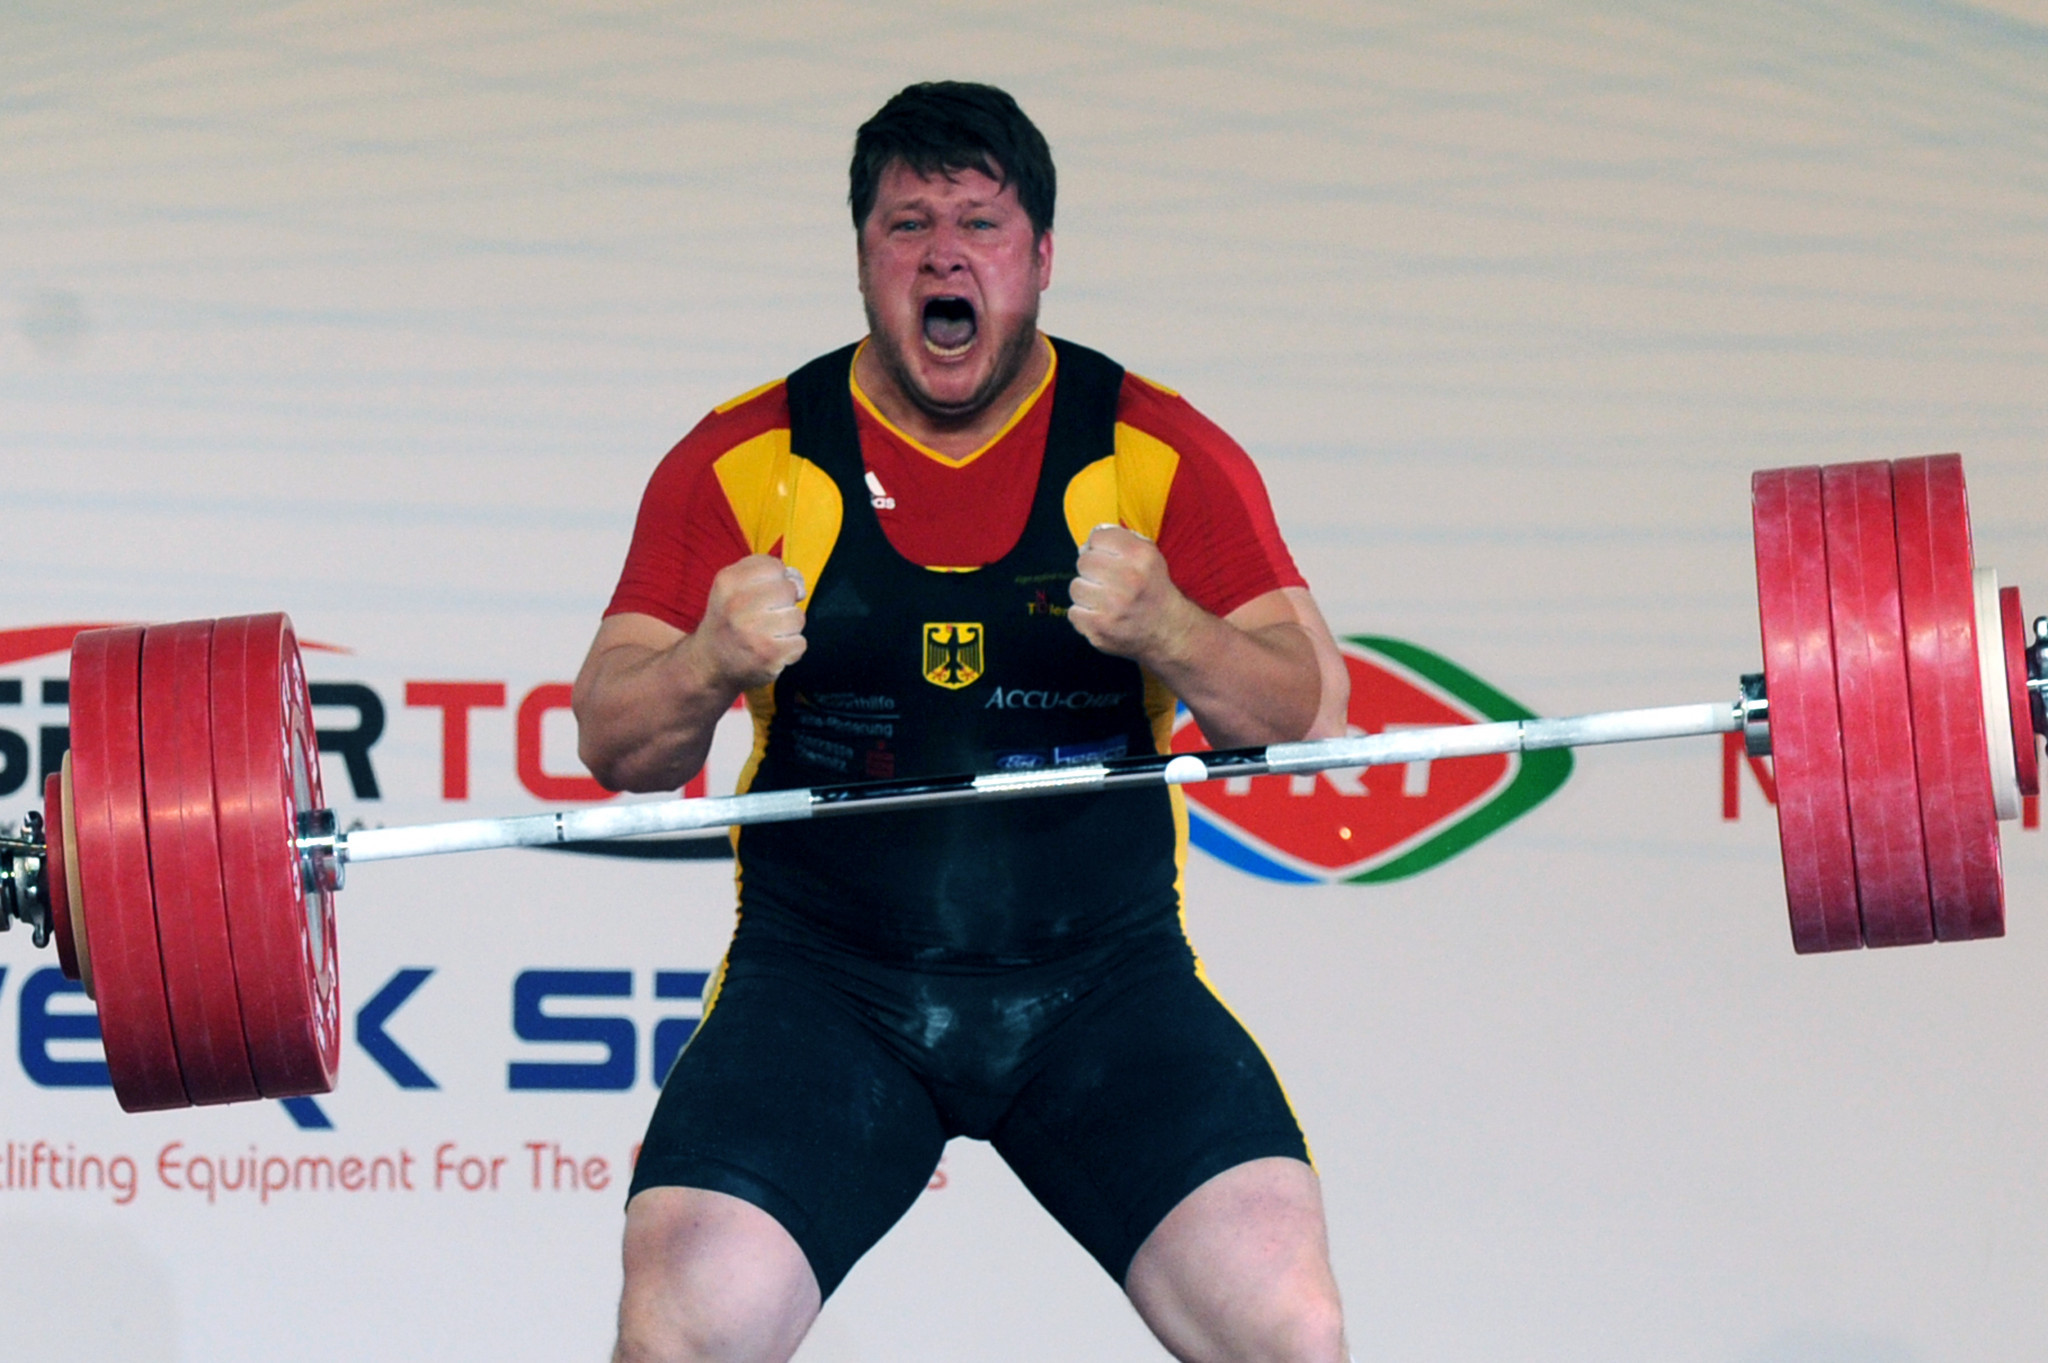 Matthias Steiner was the last German to win gold at an Olympic Games ©Getty Images